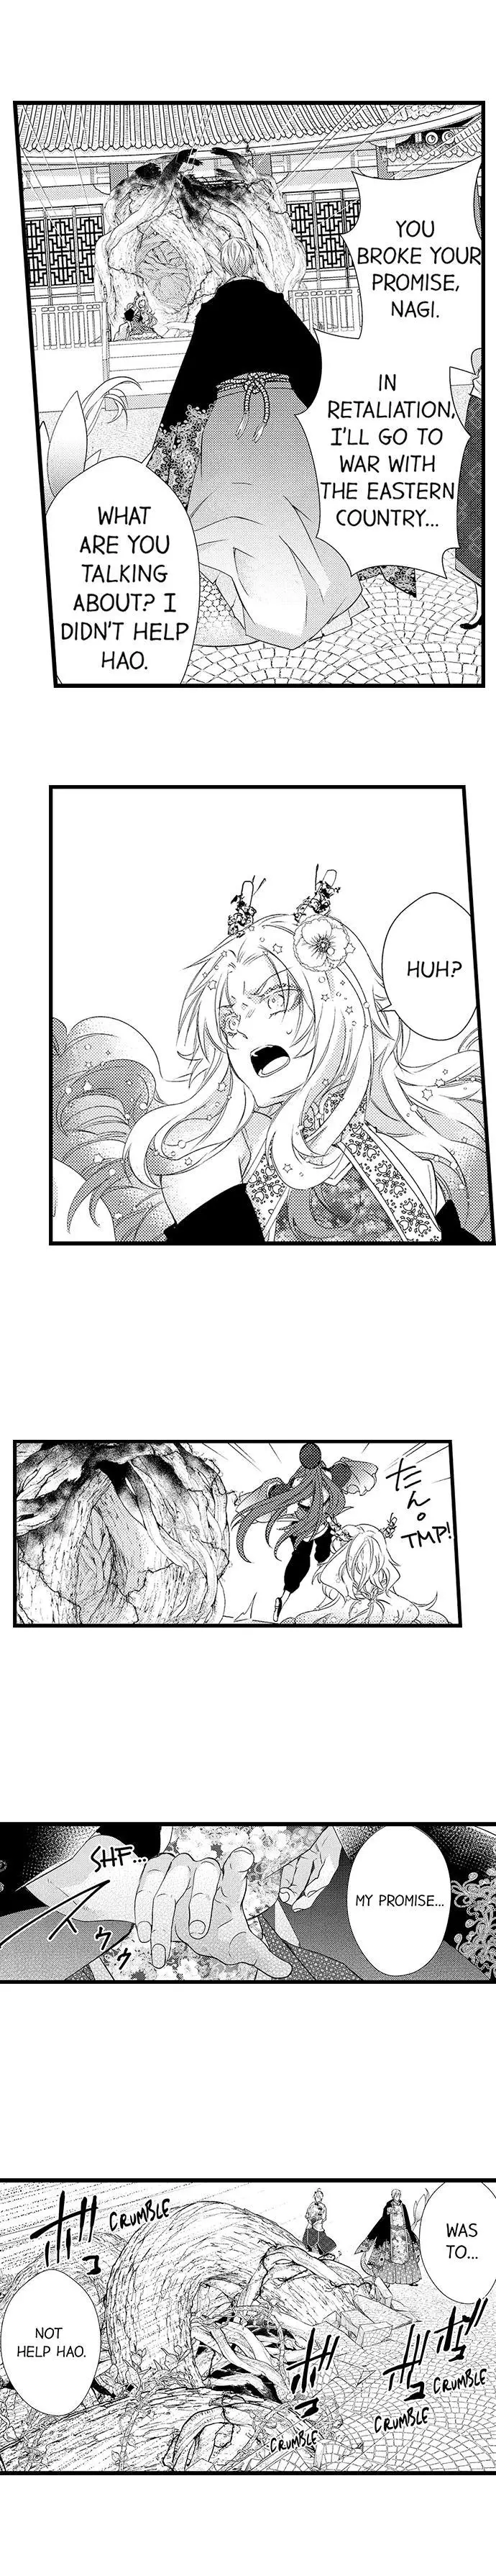 Fanboy Summoning Shafted By An Otherworldly Beast - 103 page 6-60695112